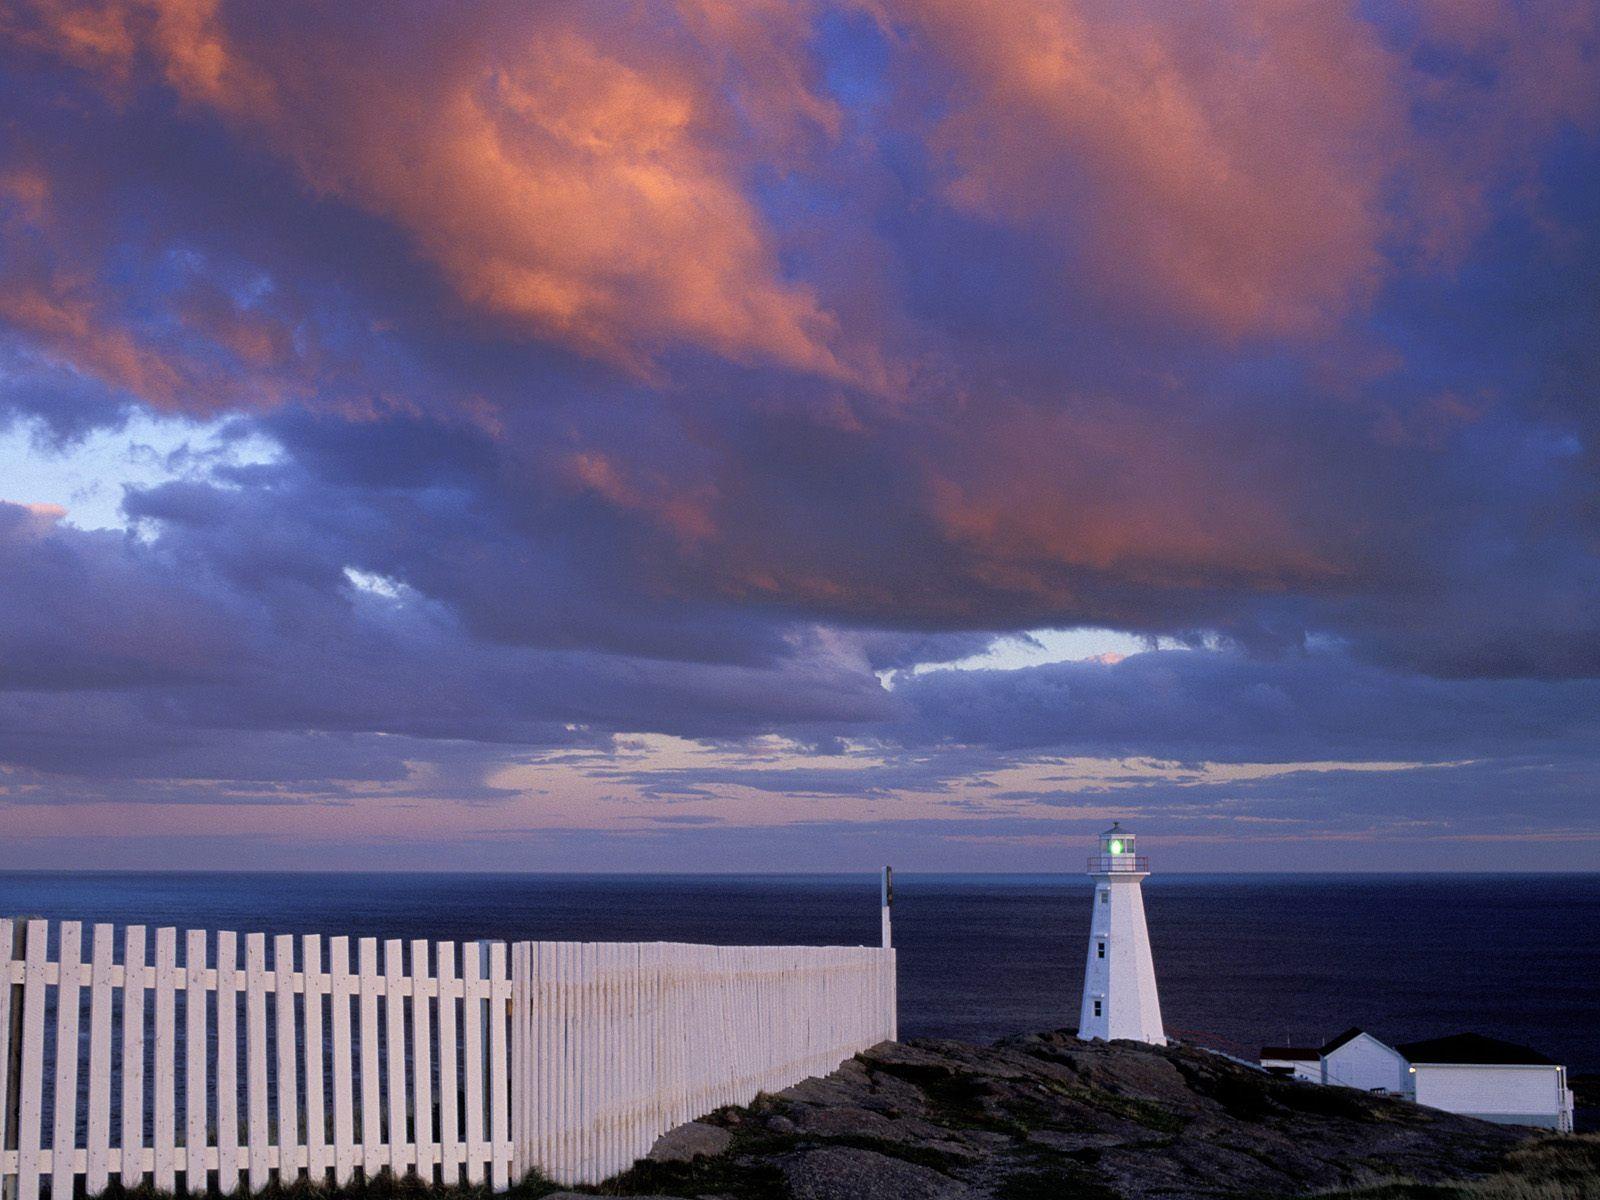 Cape Spear Lighthouse Newfoundland Canada picture, Cape Spear